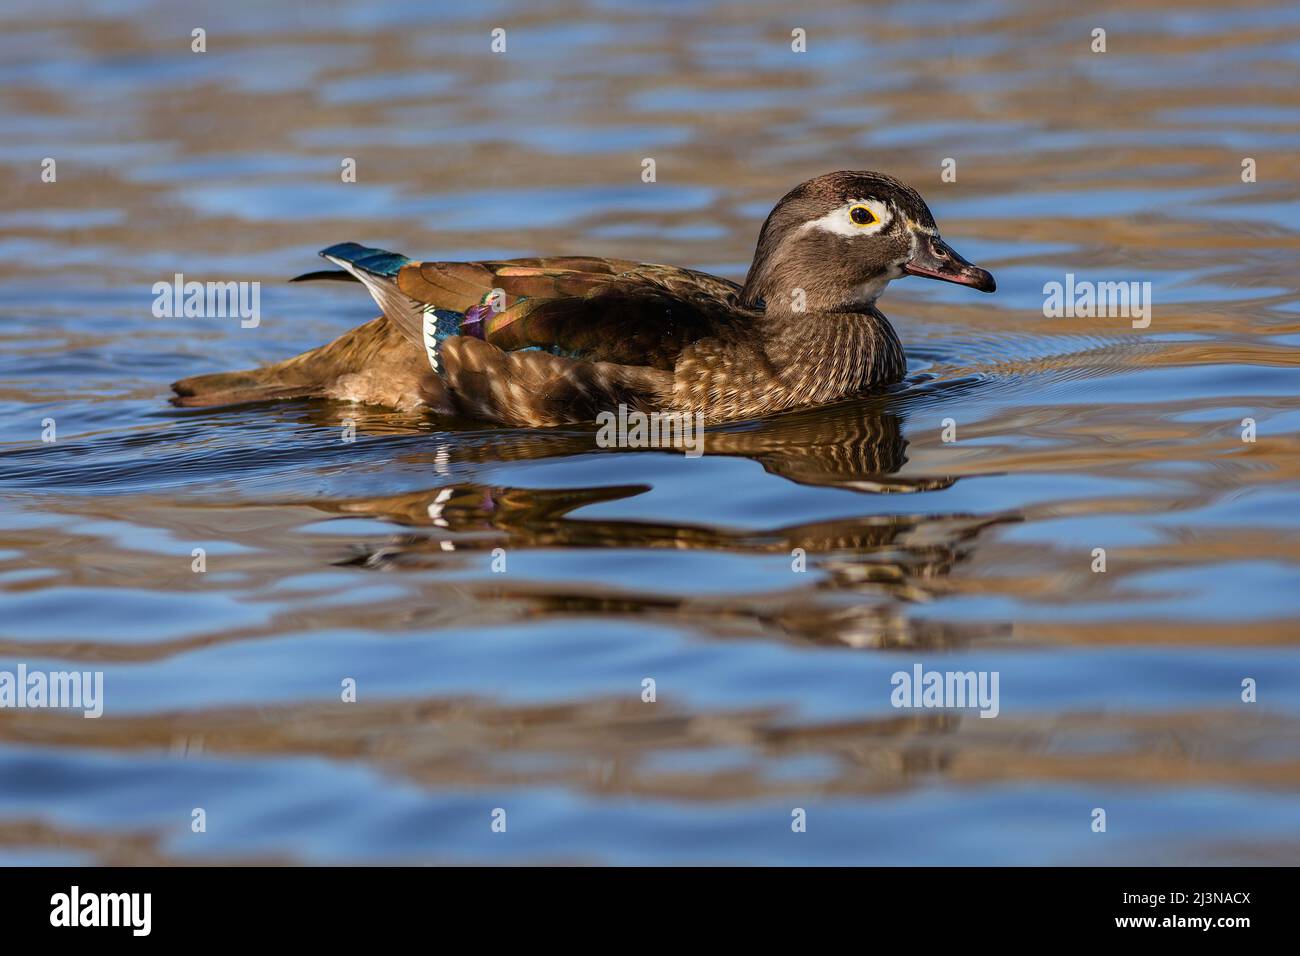 The wood duck, a brownish and grey coloured female waterbird, swimming in a lake with blue water on a sunny day. Stock Photo